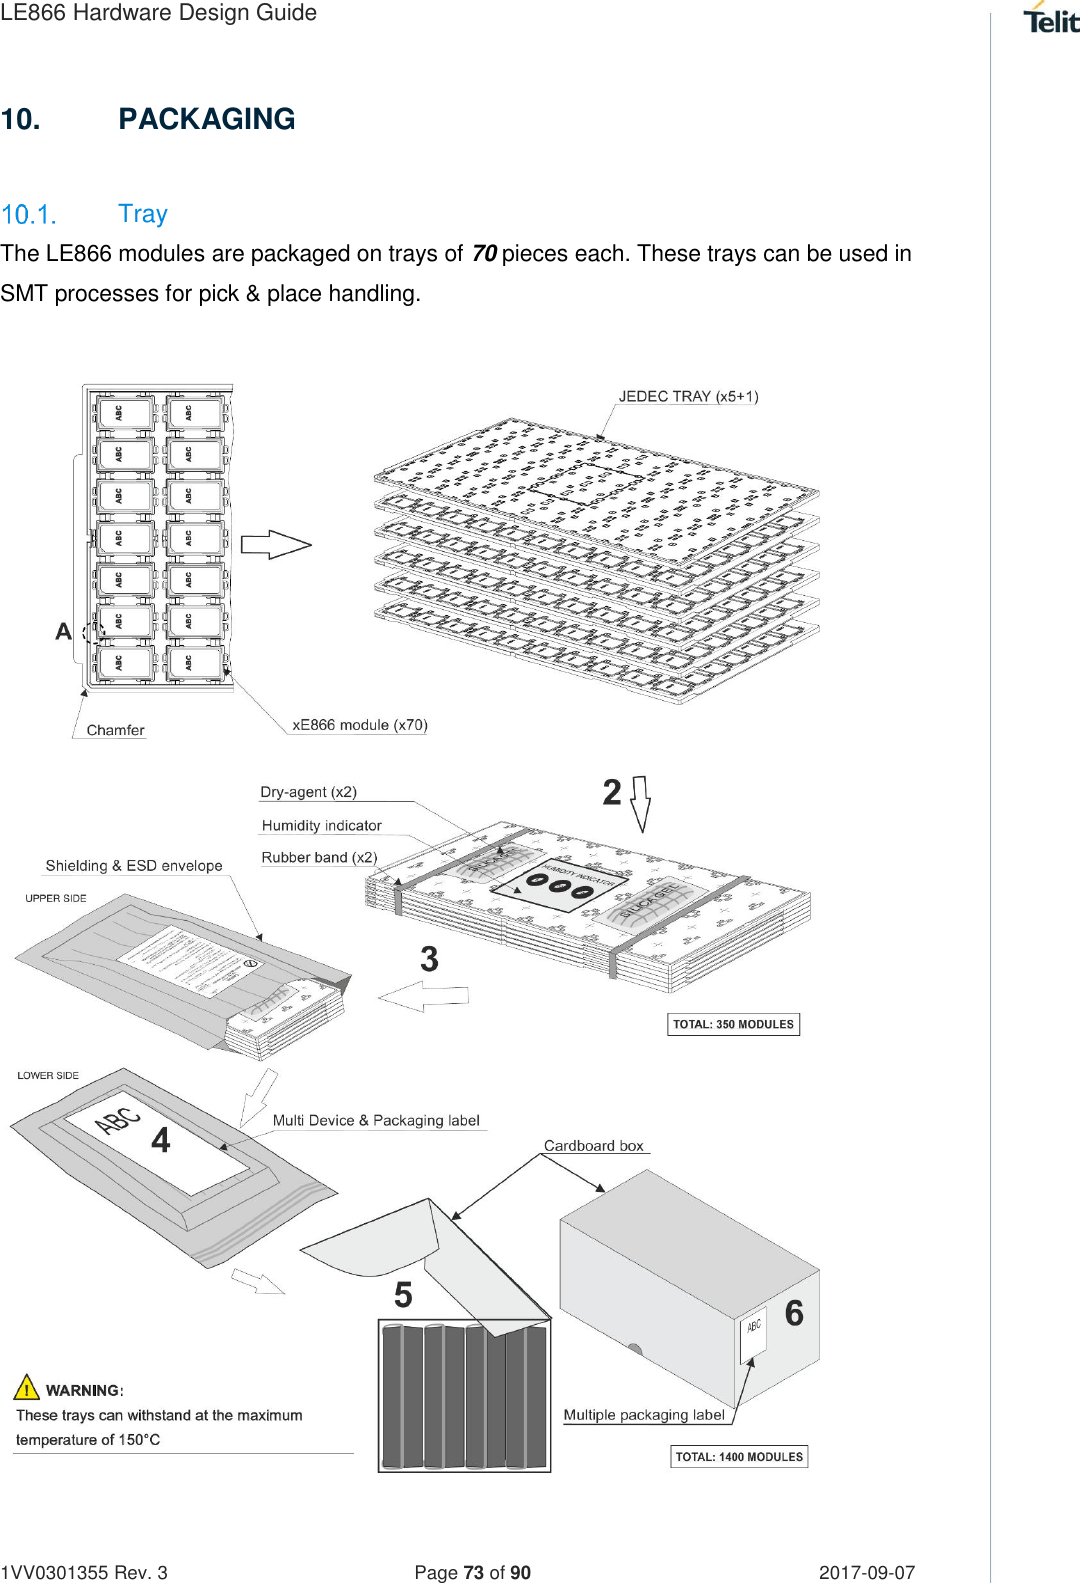 LE866 Hardware Design Guide   1VV0301355 Rev. 3   Page 73 of 90 2017-09-07  10.  PACKAGING   Tray The LE866 modules are packaged on trays of 70 pieces each. These trays can be used in SMT processes for pick &amp; place handling.   